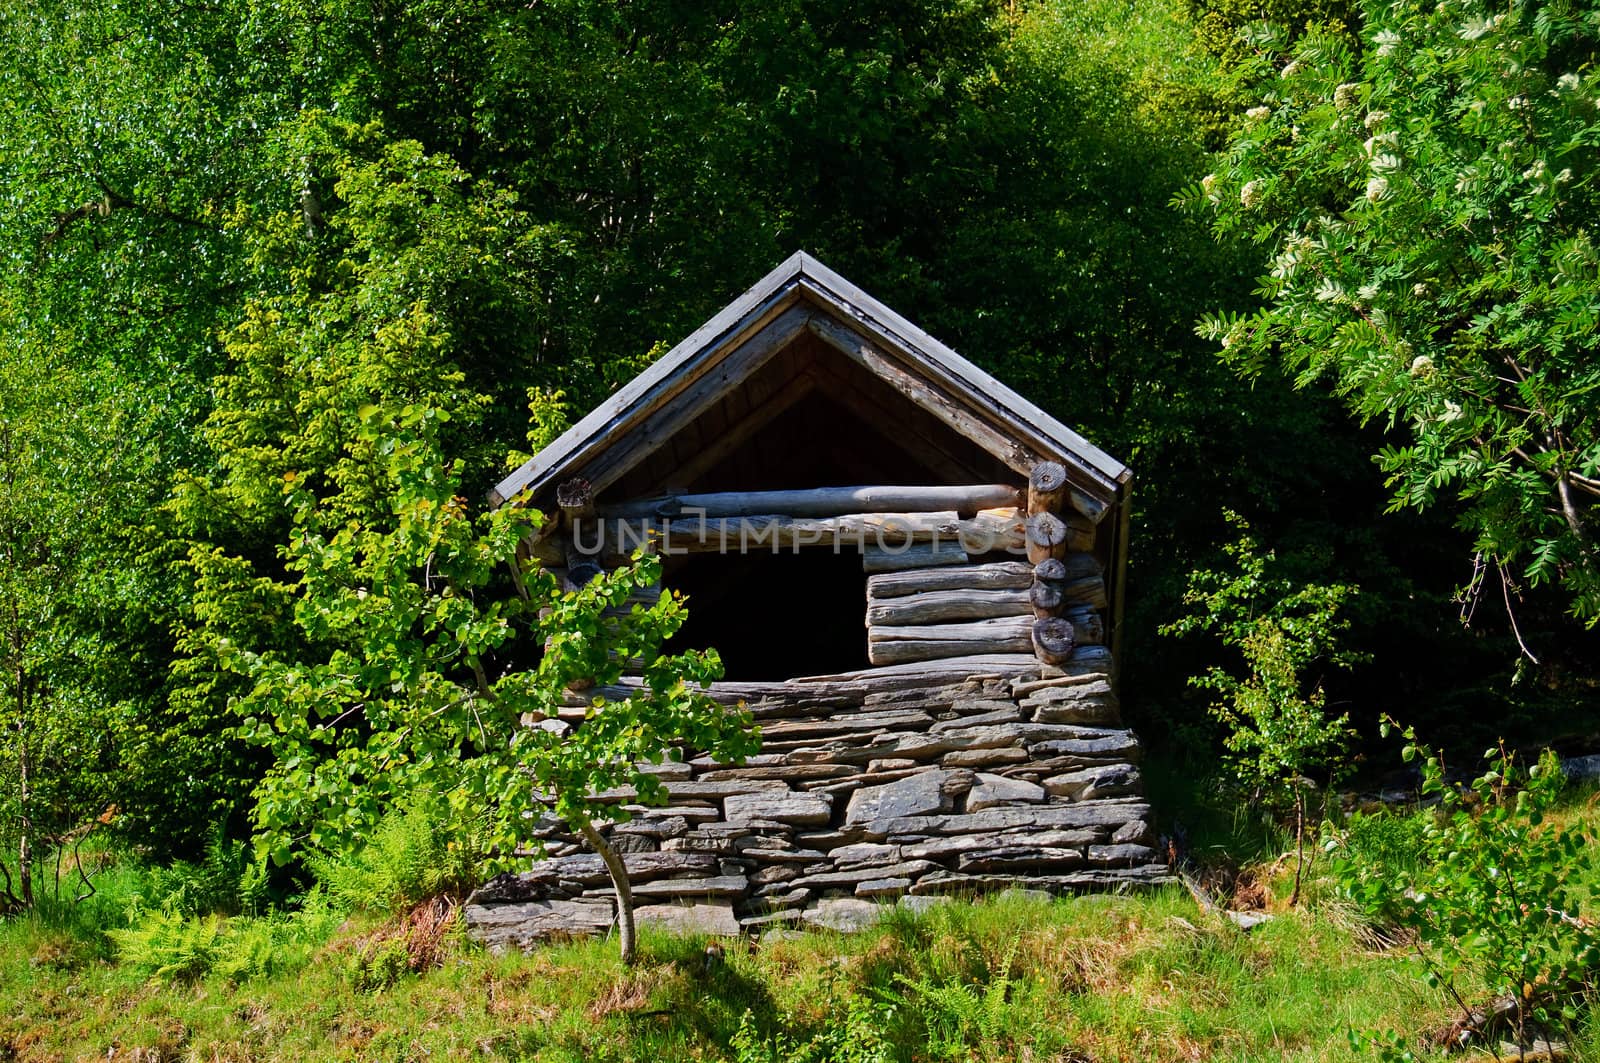 A small alpine shed in the woods